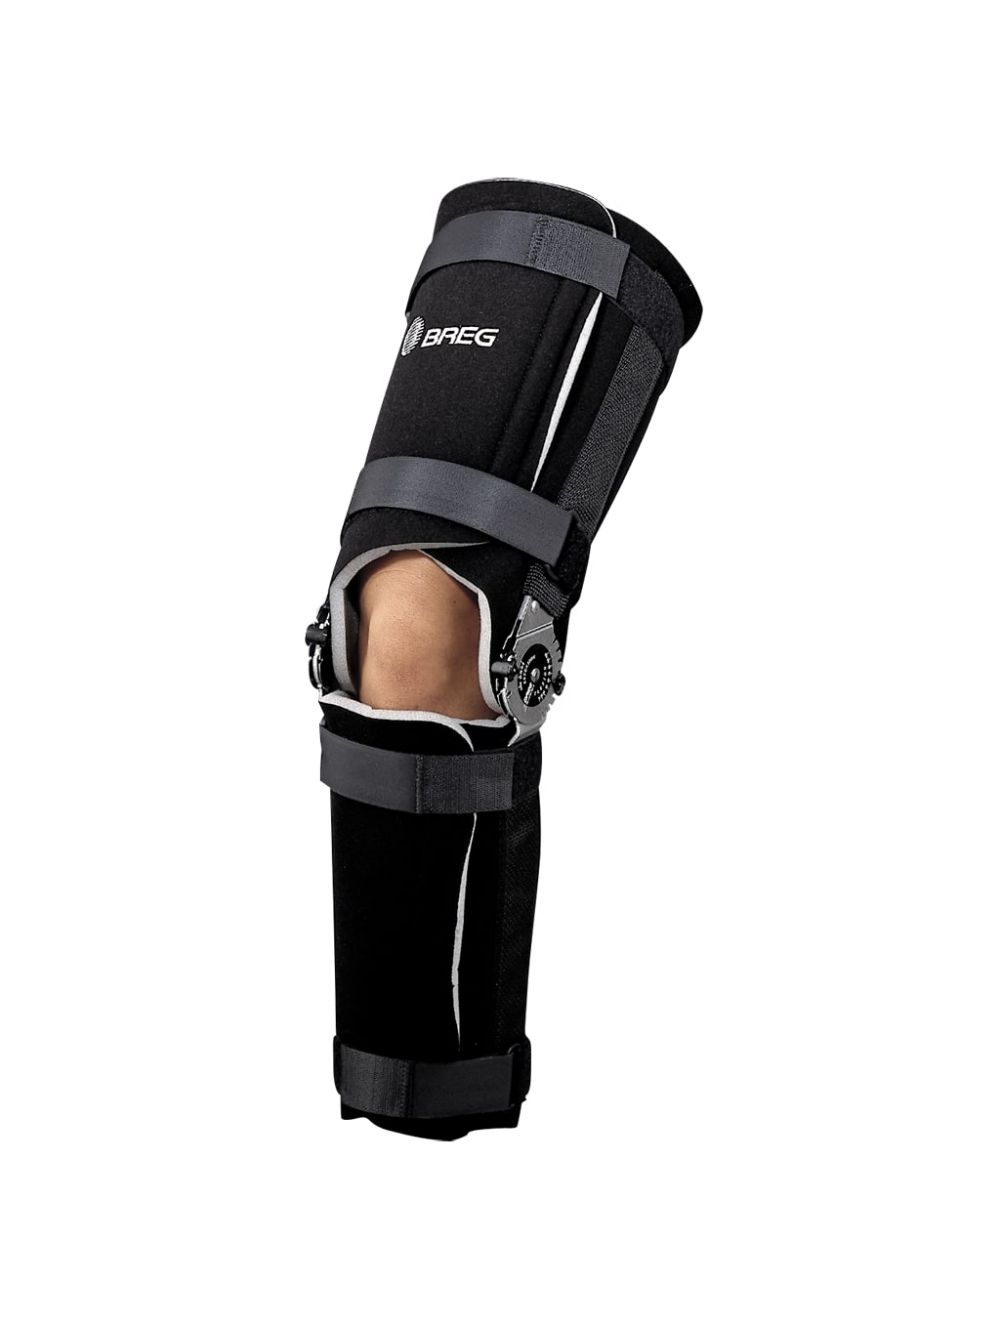 California Medical Supply Company Breg Quick Fit EPO Post-Op Knee Brace AAA  Medical Supply In San Diego